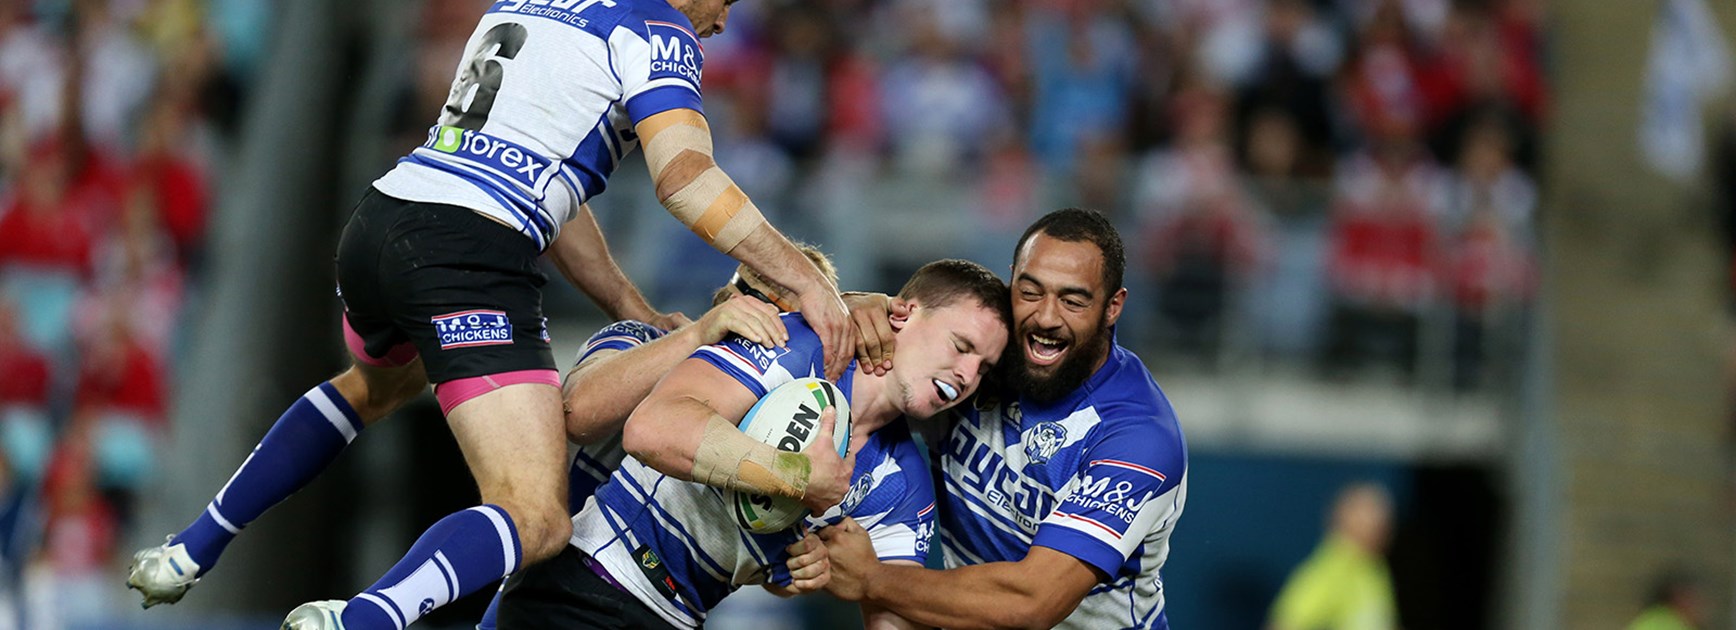 The Bulldogs celebrate Tim Browne's try against the Dragons in Round 13 of the Telstra Premiership.